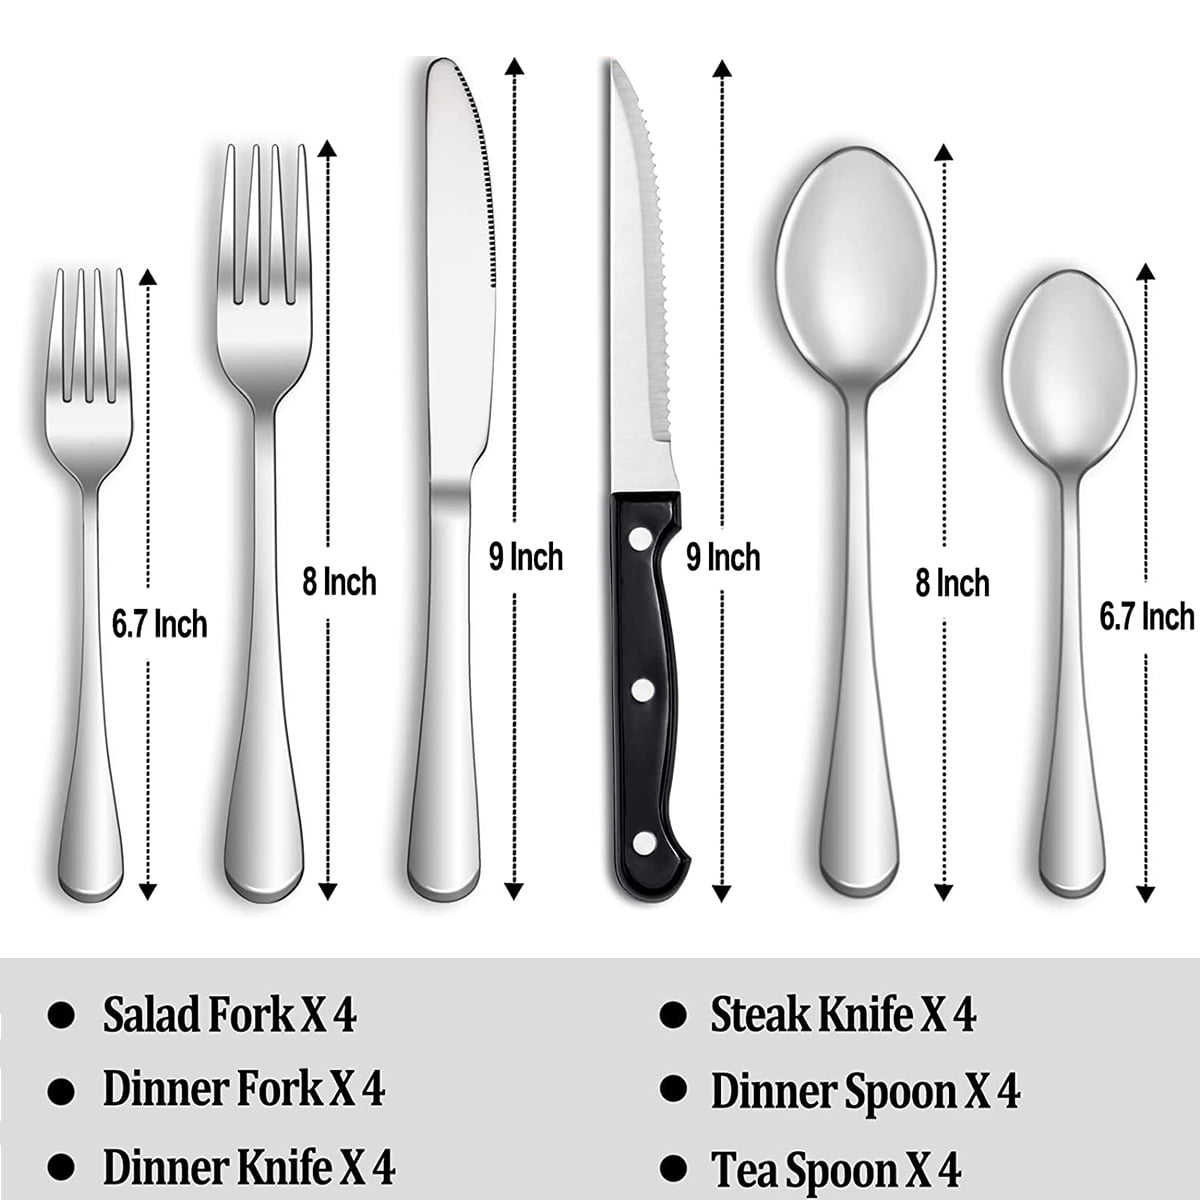 Hiware 24-Piece Silverware Set with Steak Knives, Stainless Steel Flatware  Cutlery, Mirror Polished Utensils Set for 4, Includes Forks Spoons Knives